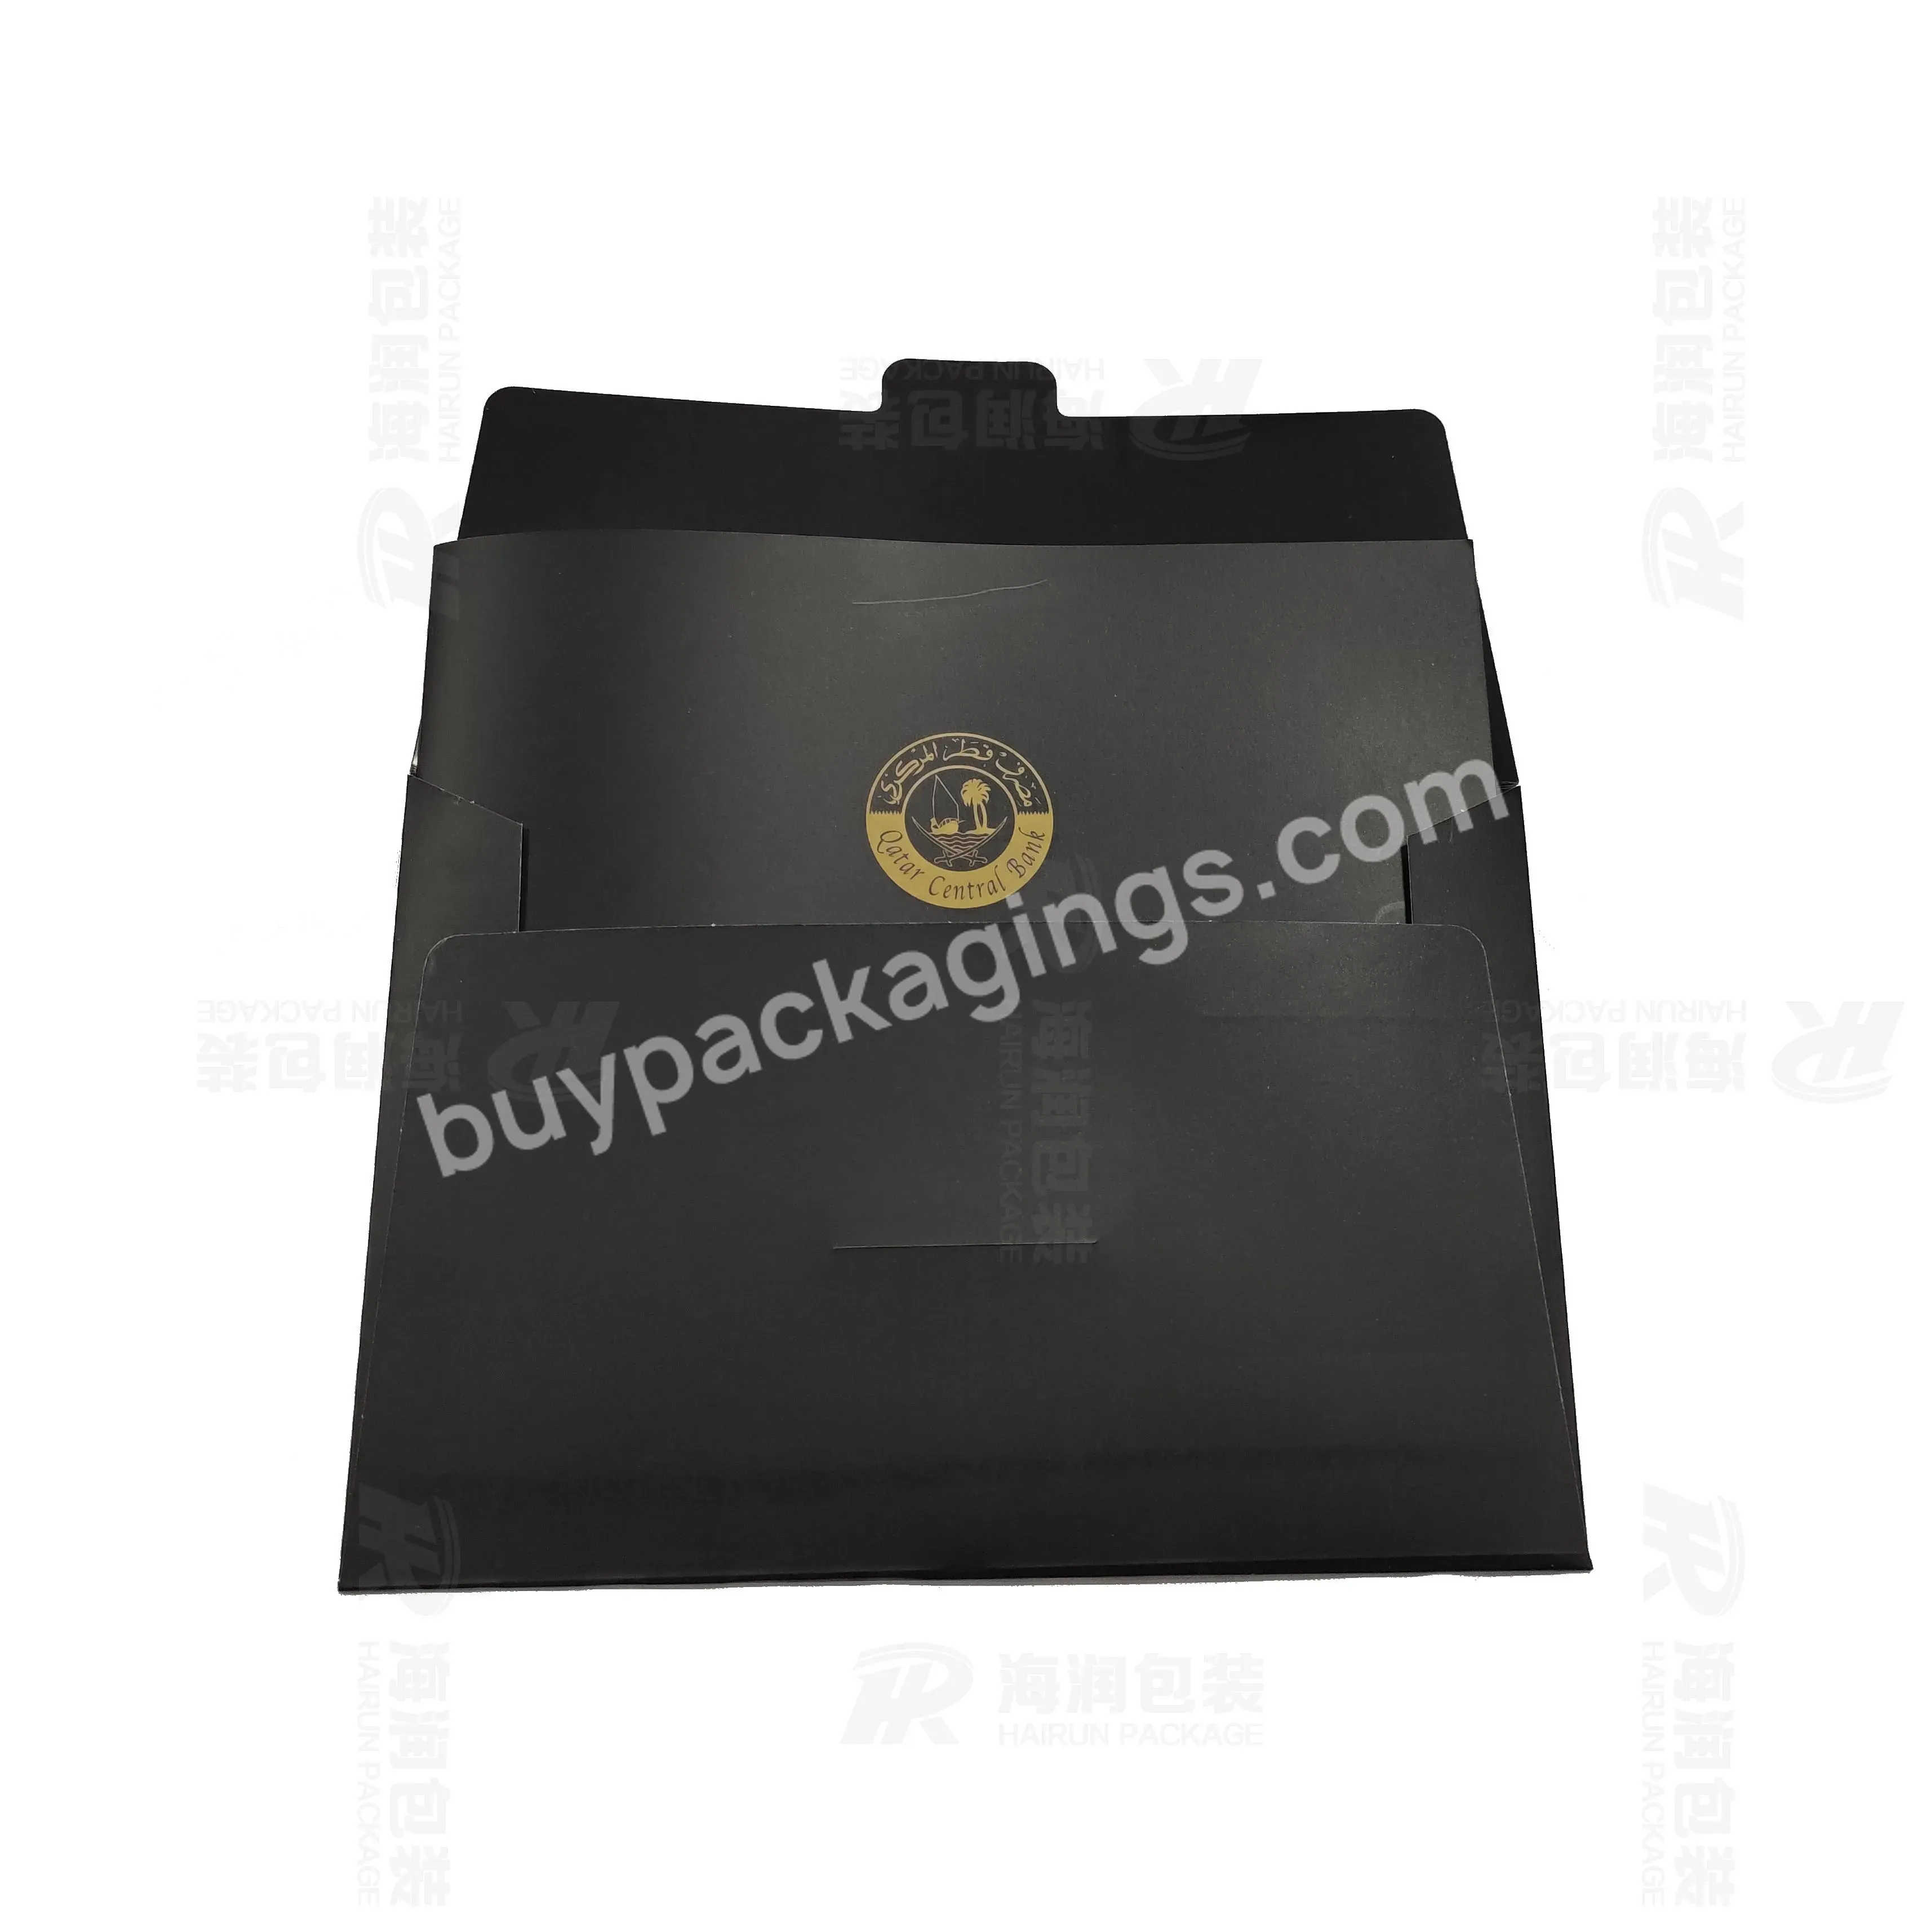 Coated Paper Envelopes Customized Wholesale Cheap Price Envelope Packaging 4 Color Printing Single Envelopes - Buy Envelopes,Envelope Packaging,Paper Envelopes.